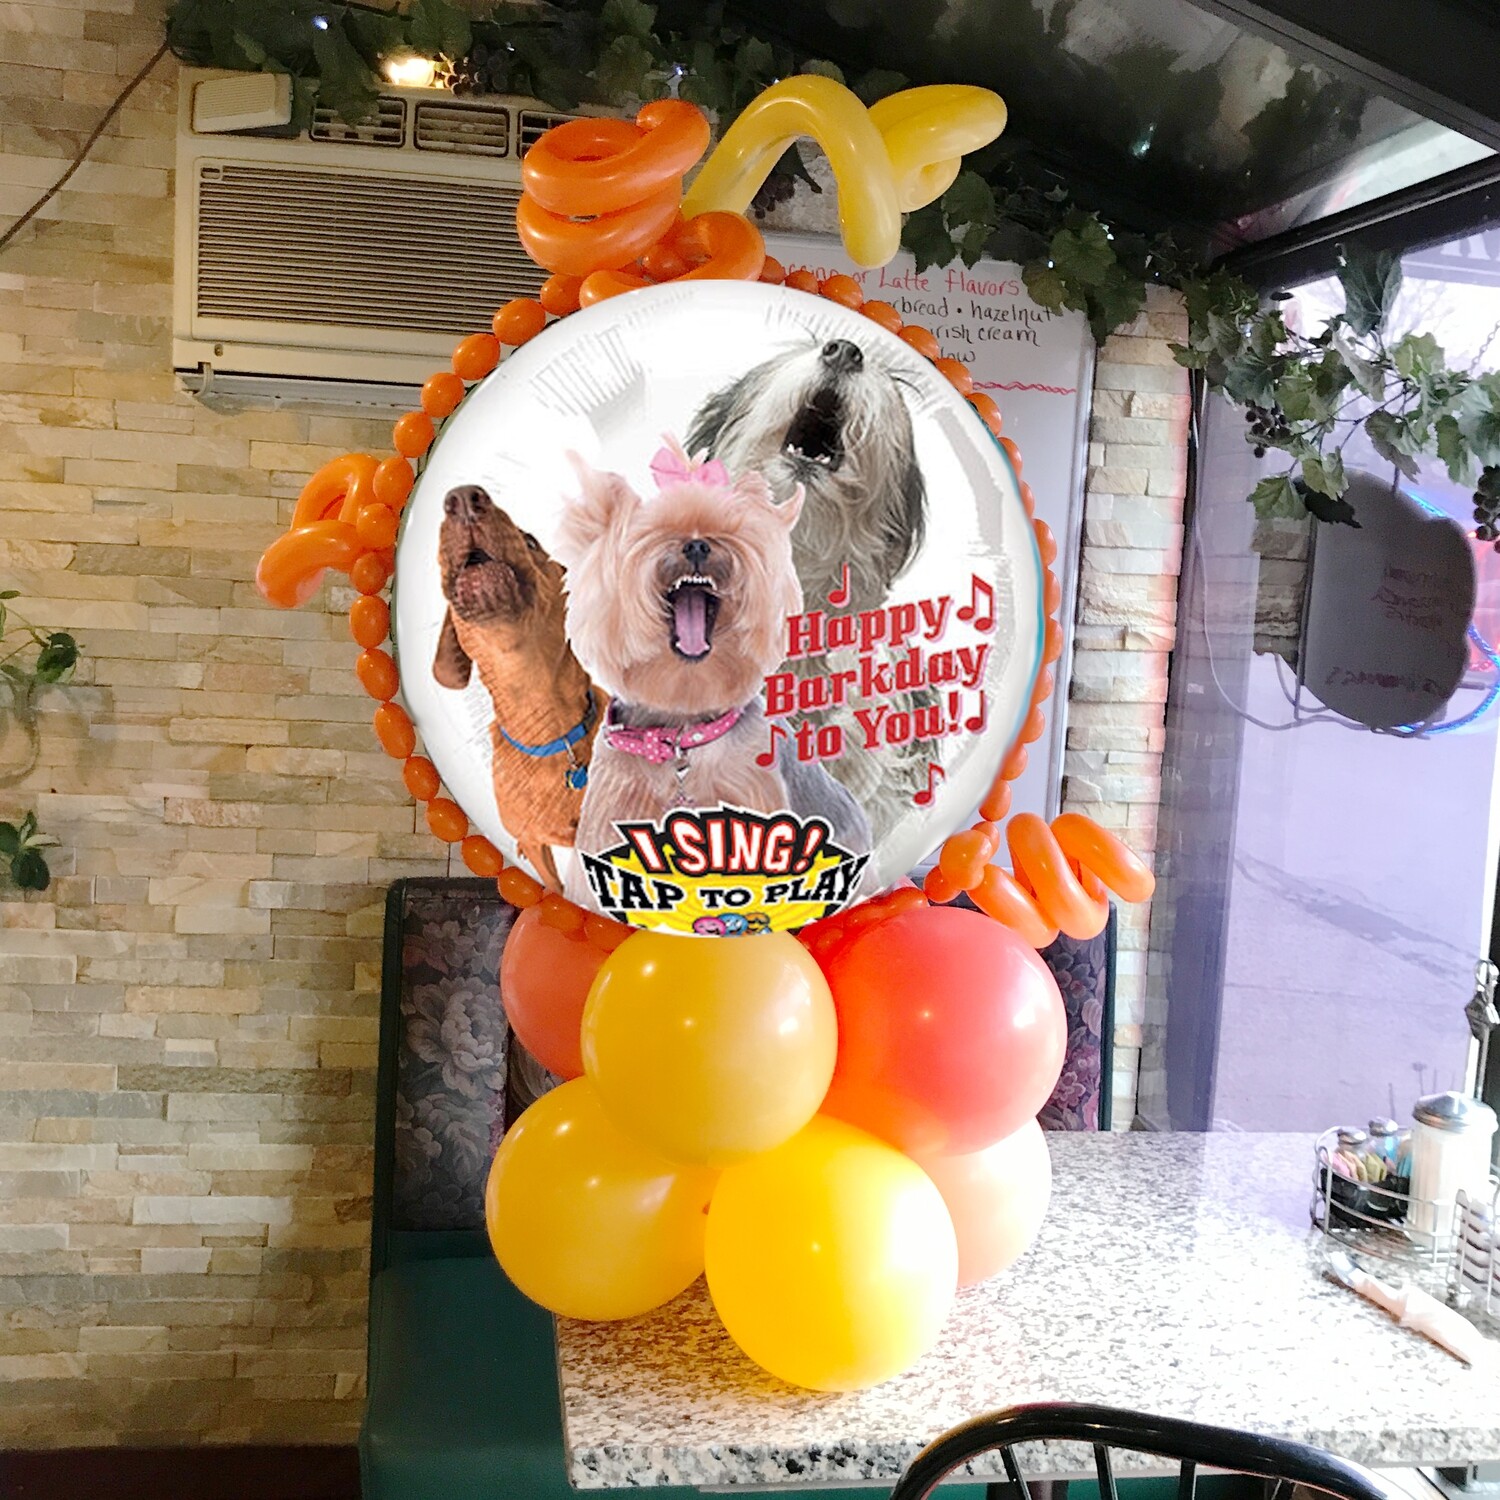 Giant singing balloon bouquet with dogs, air filled